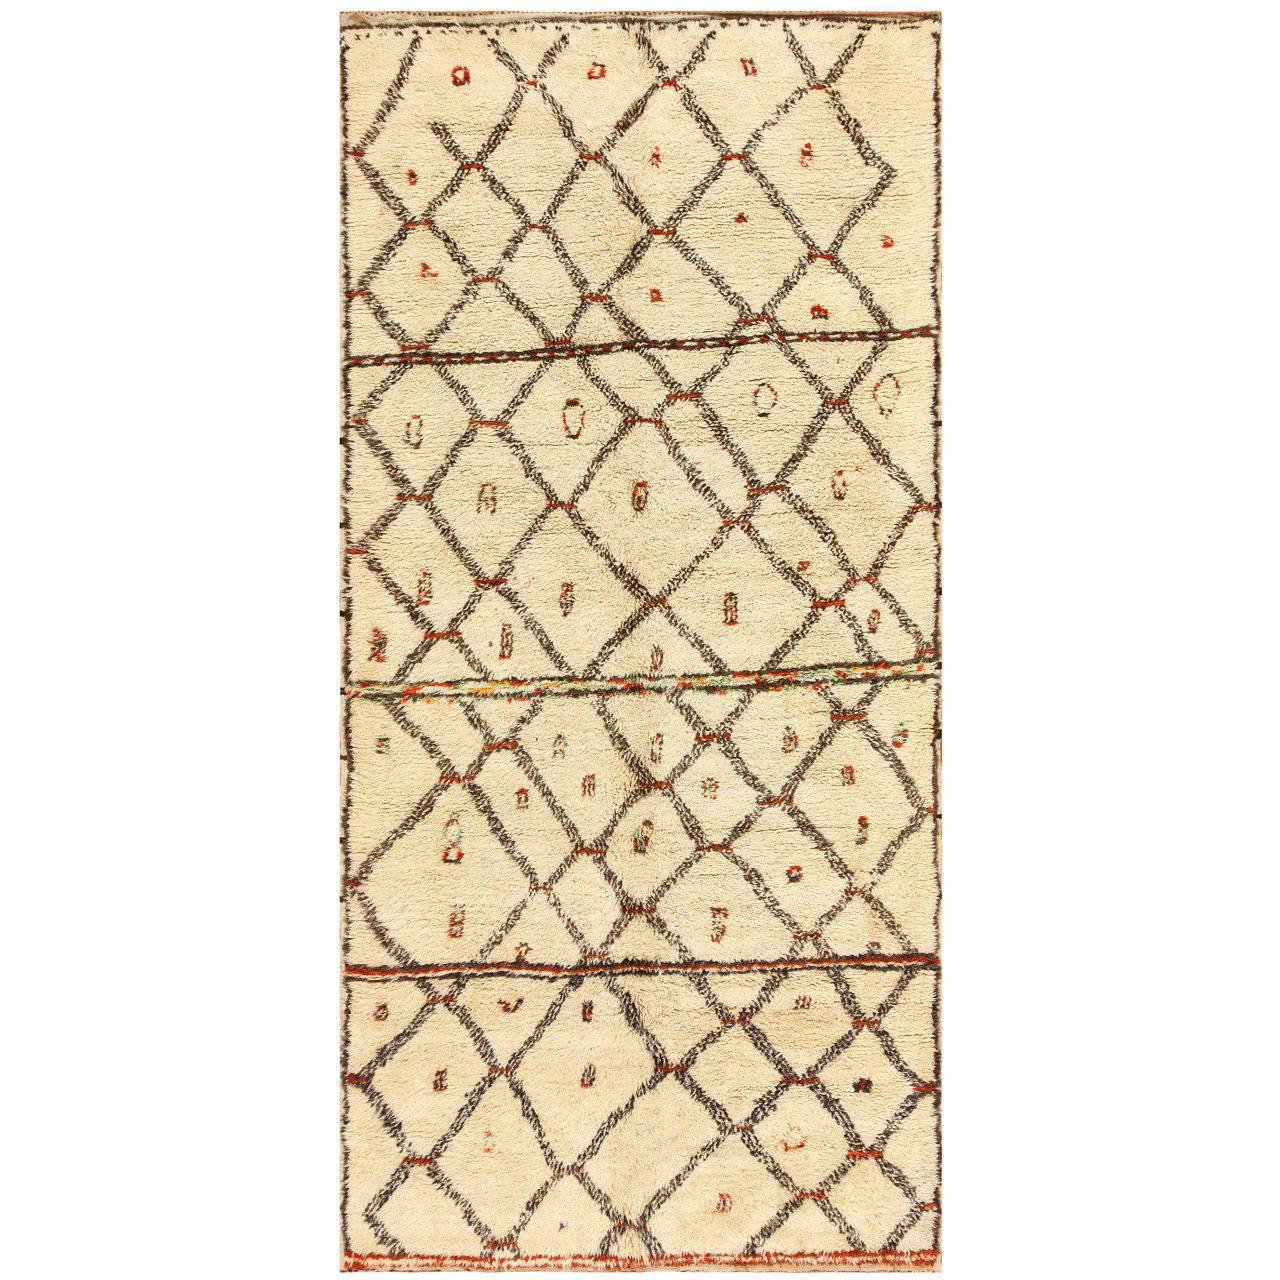 Ivory Vintage Moroccan Rug. Size: 5 ft 8 in x 12 ft For Sale